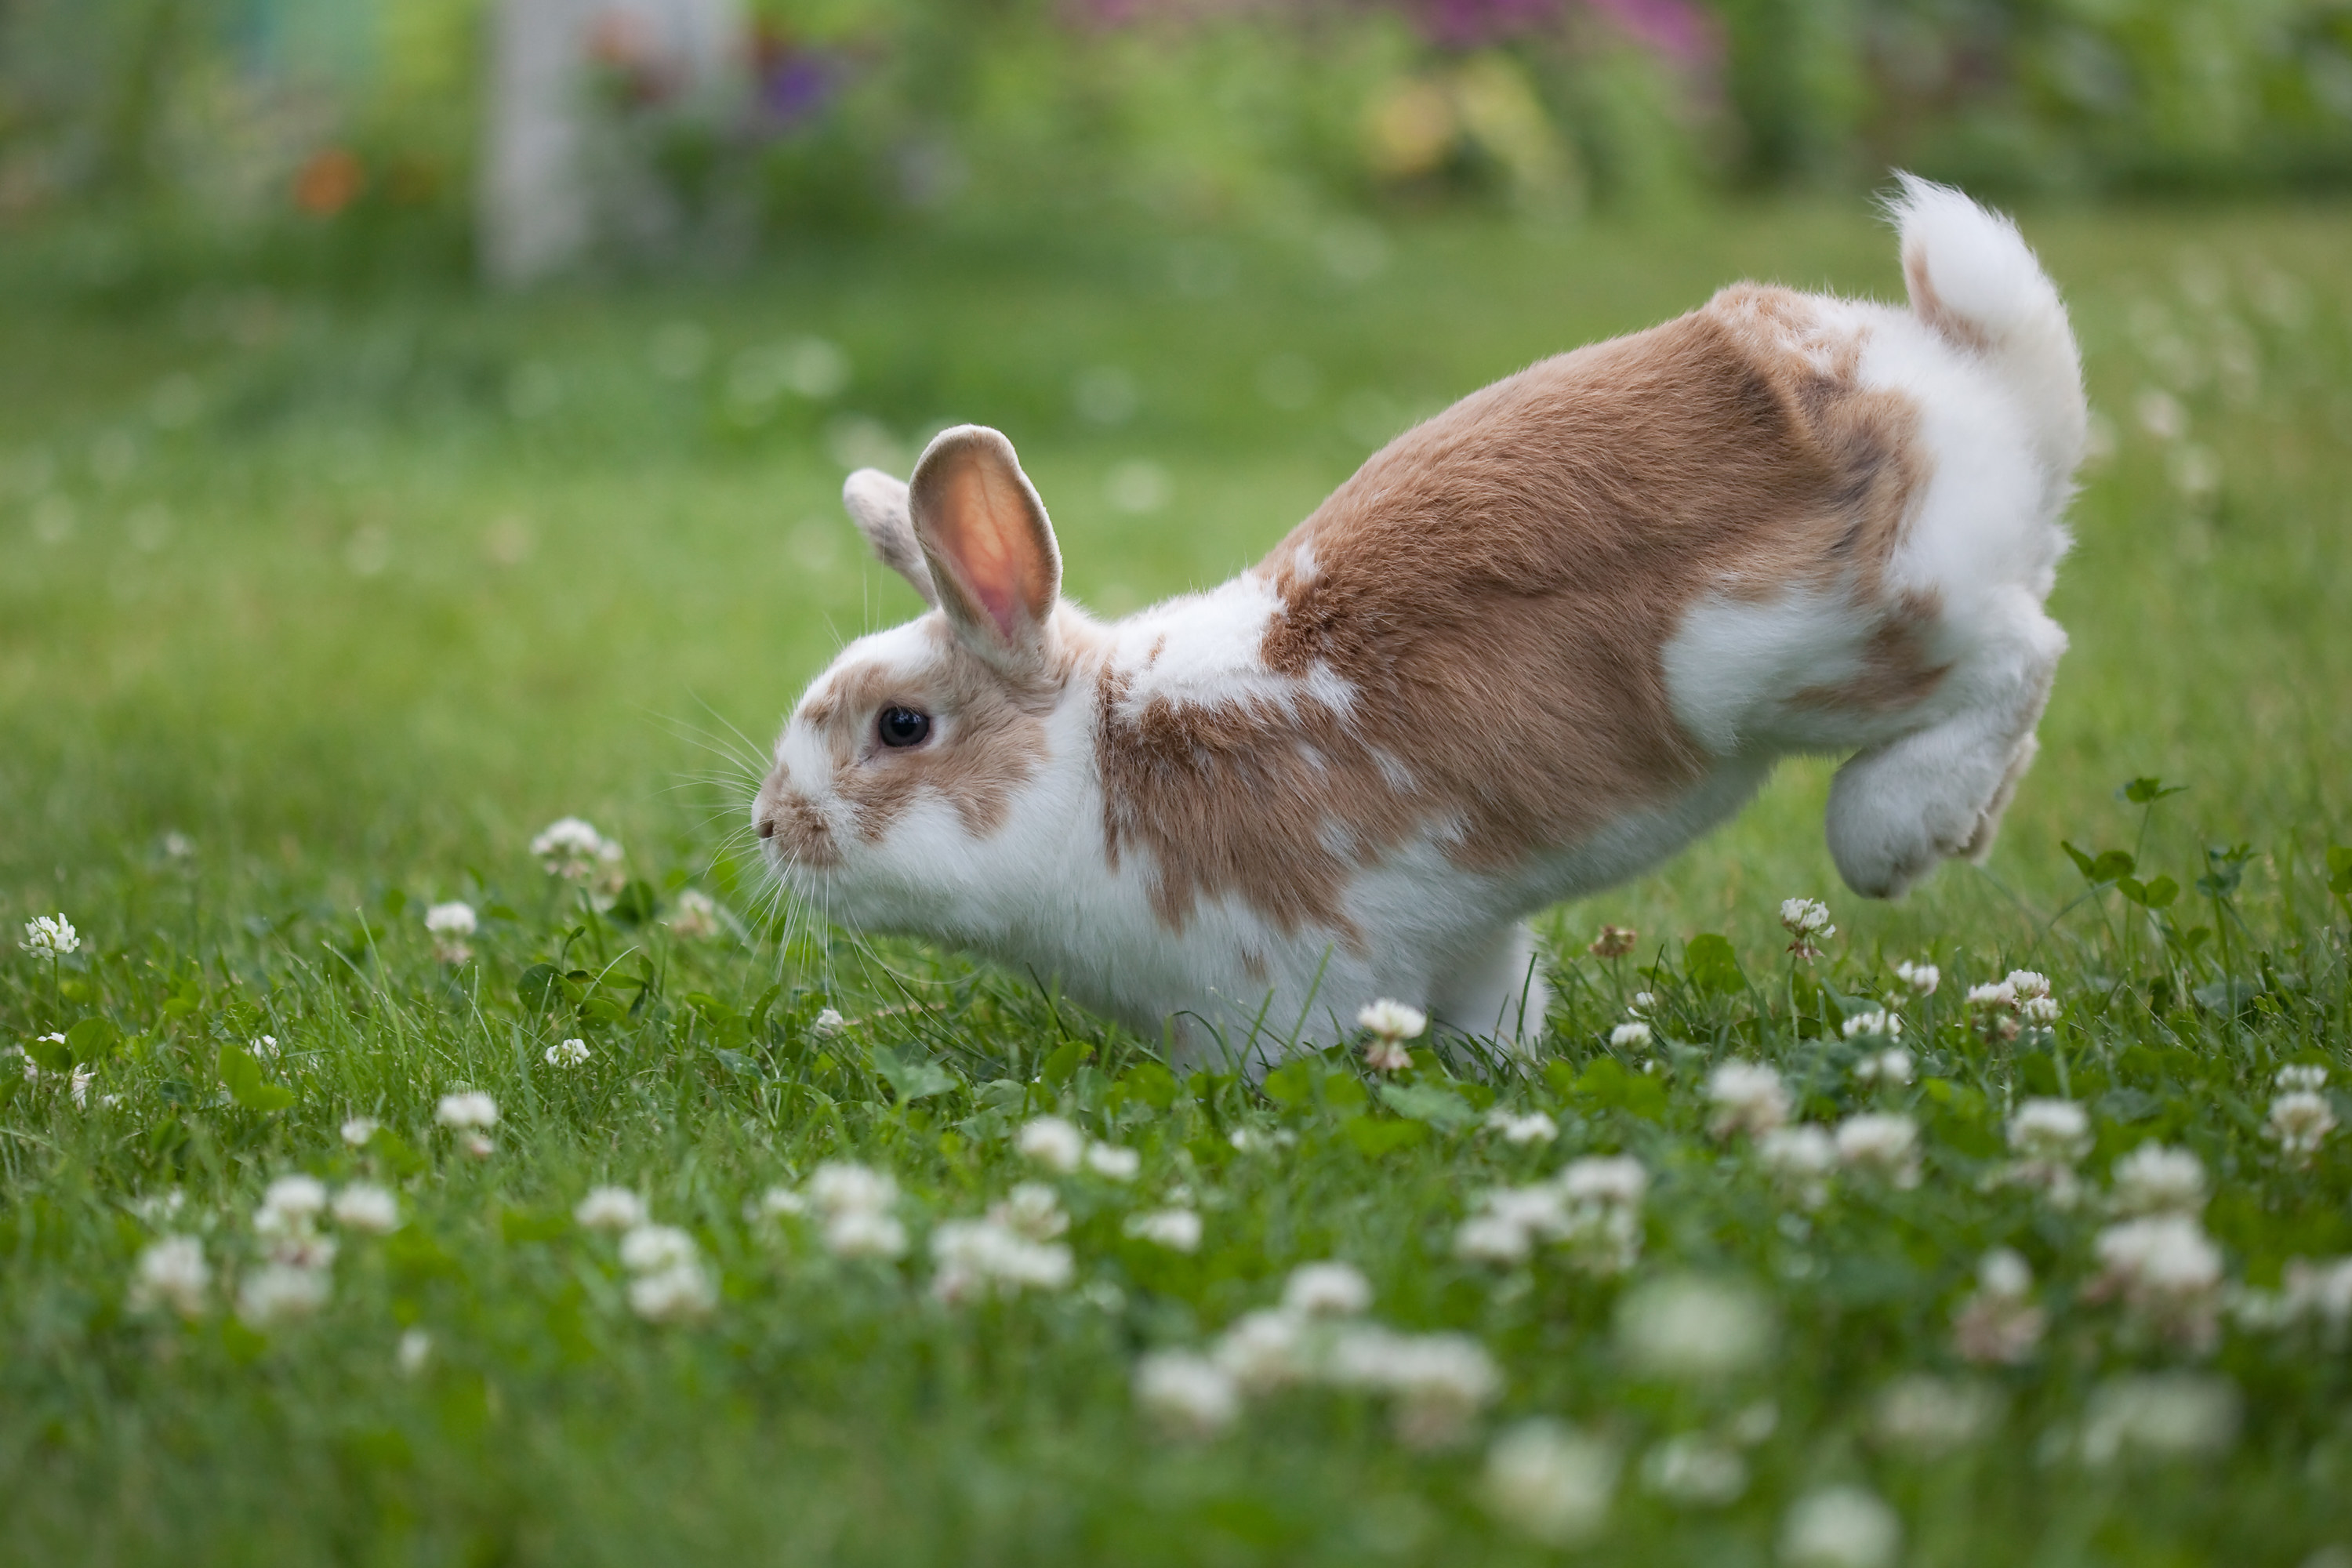 A bunny hopping on the grass